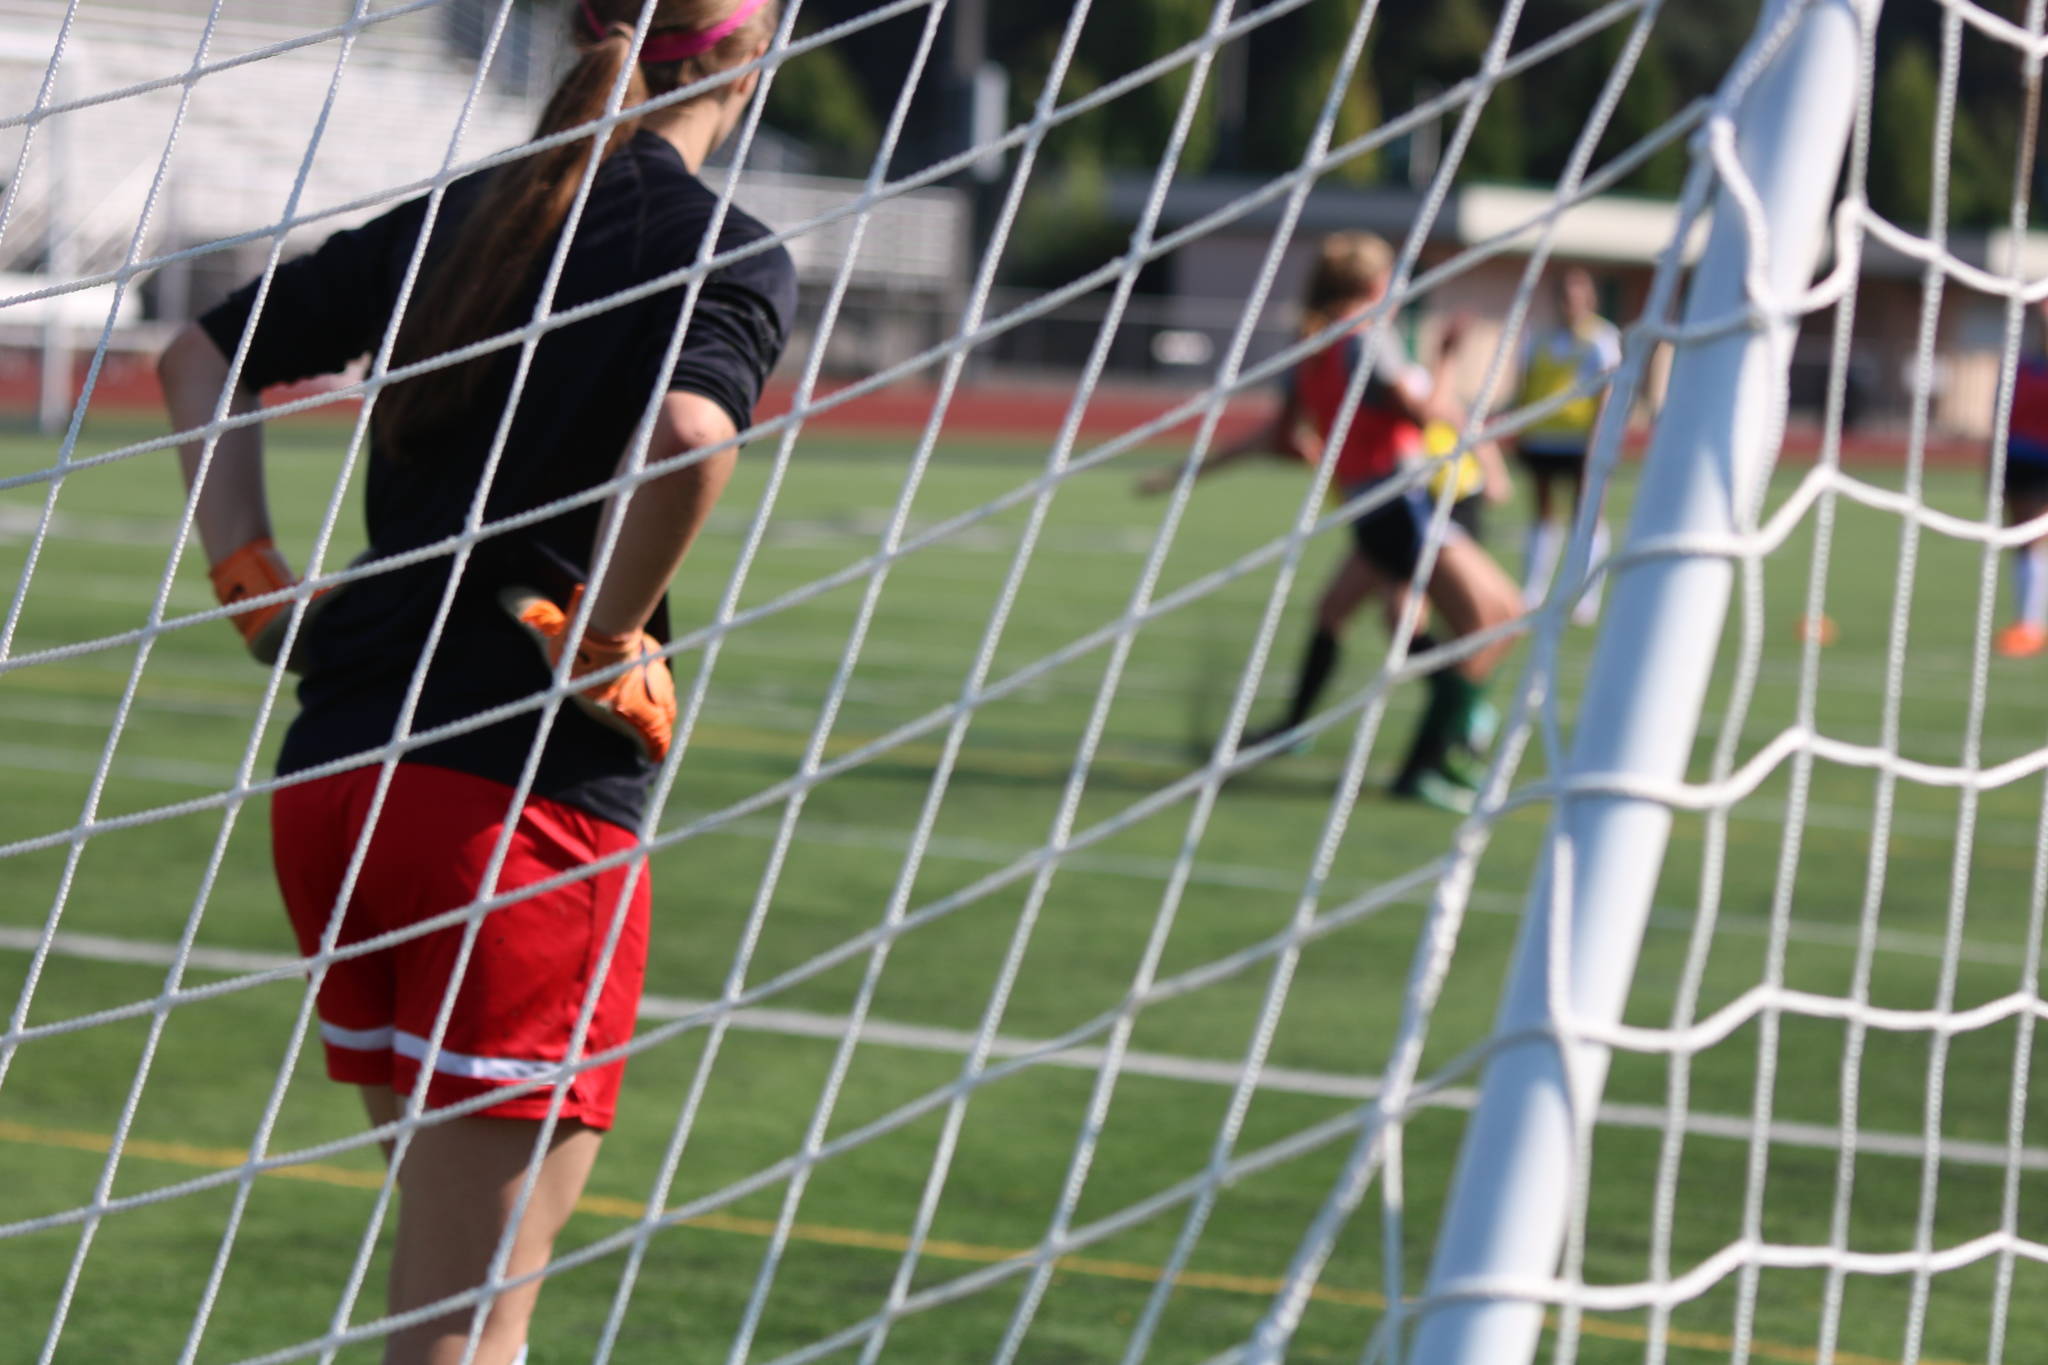 The scene from behind a goal at Redmond High’s Aug. 28 practice. Andy Nystrom / staff photo